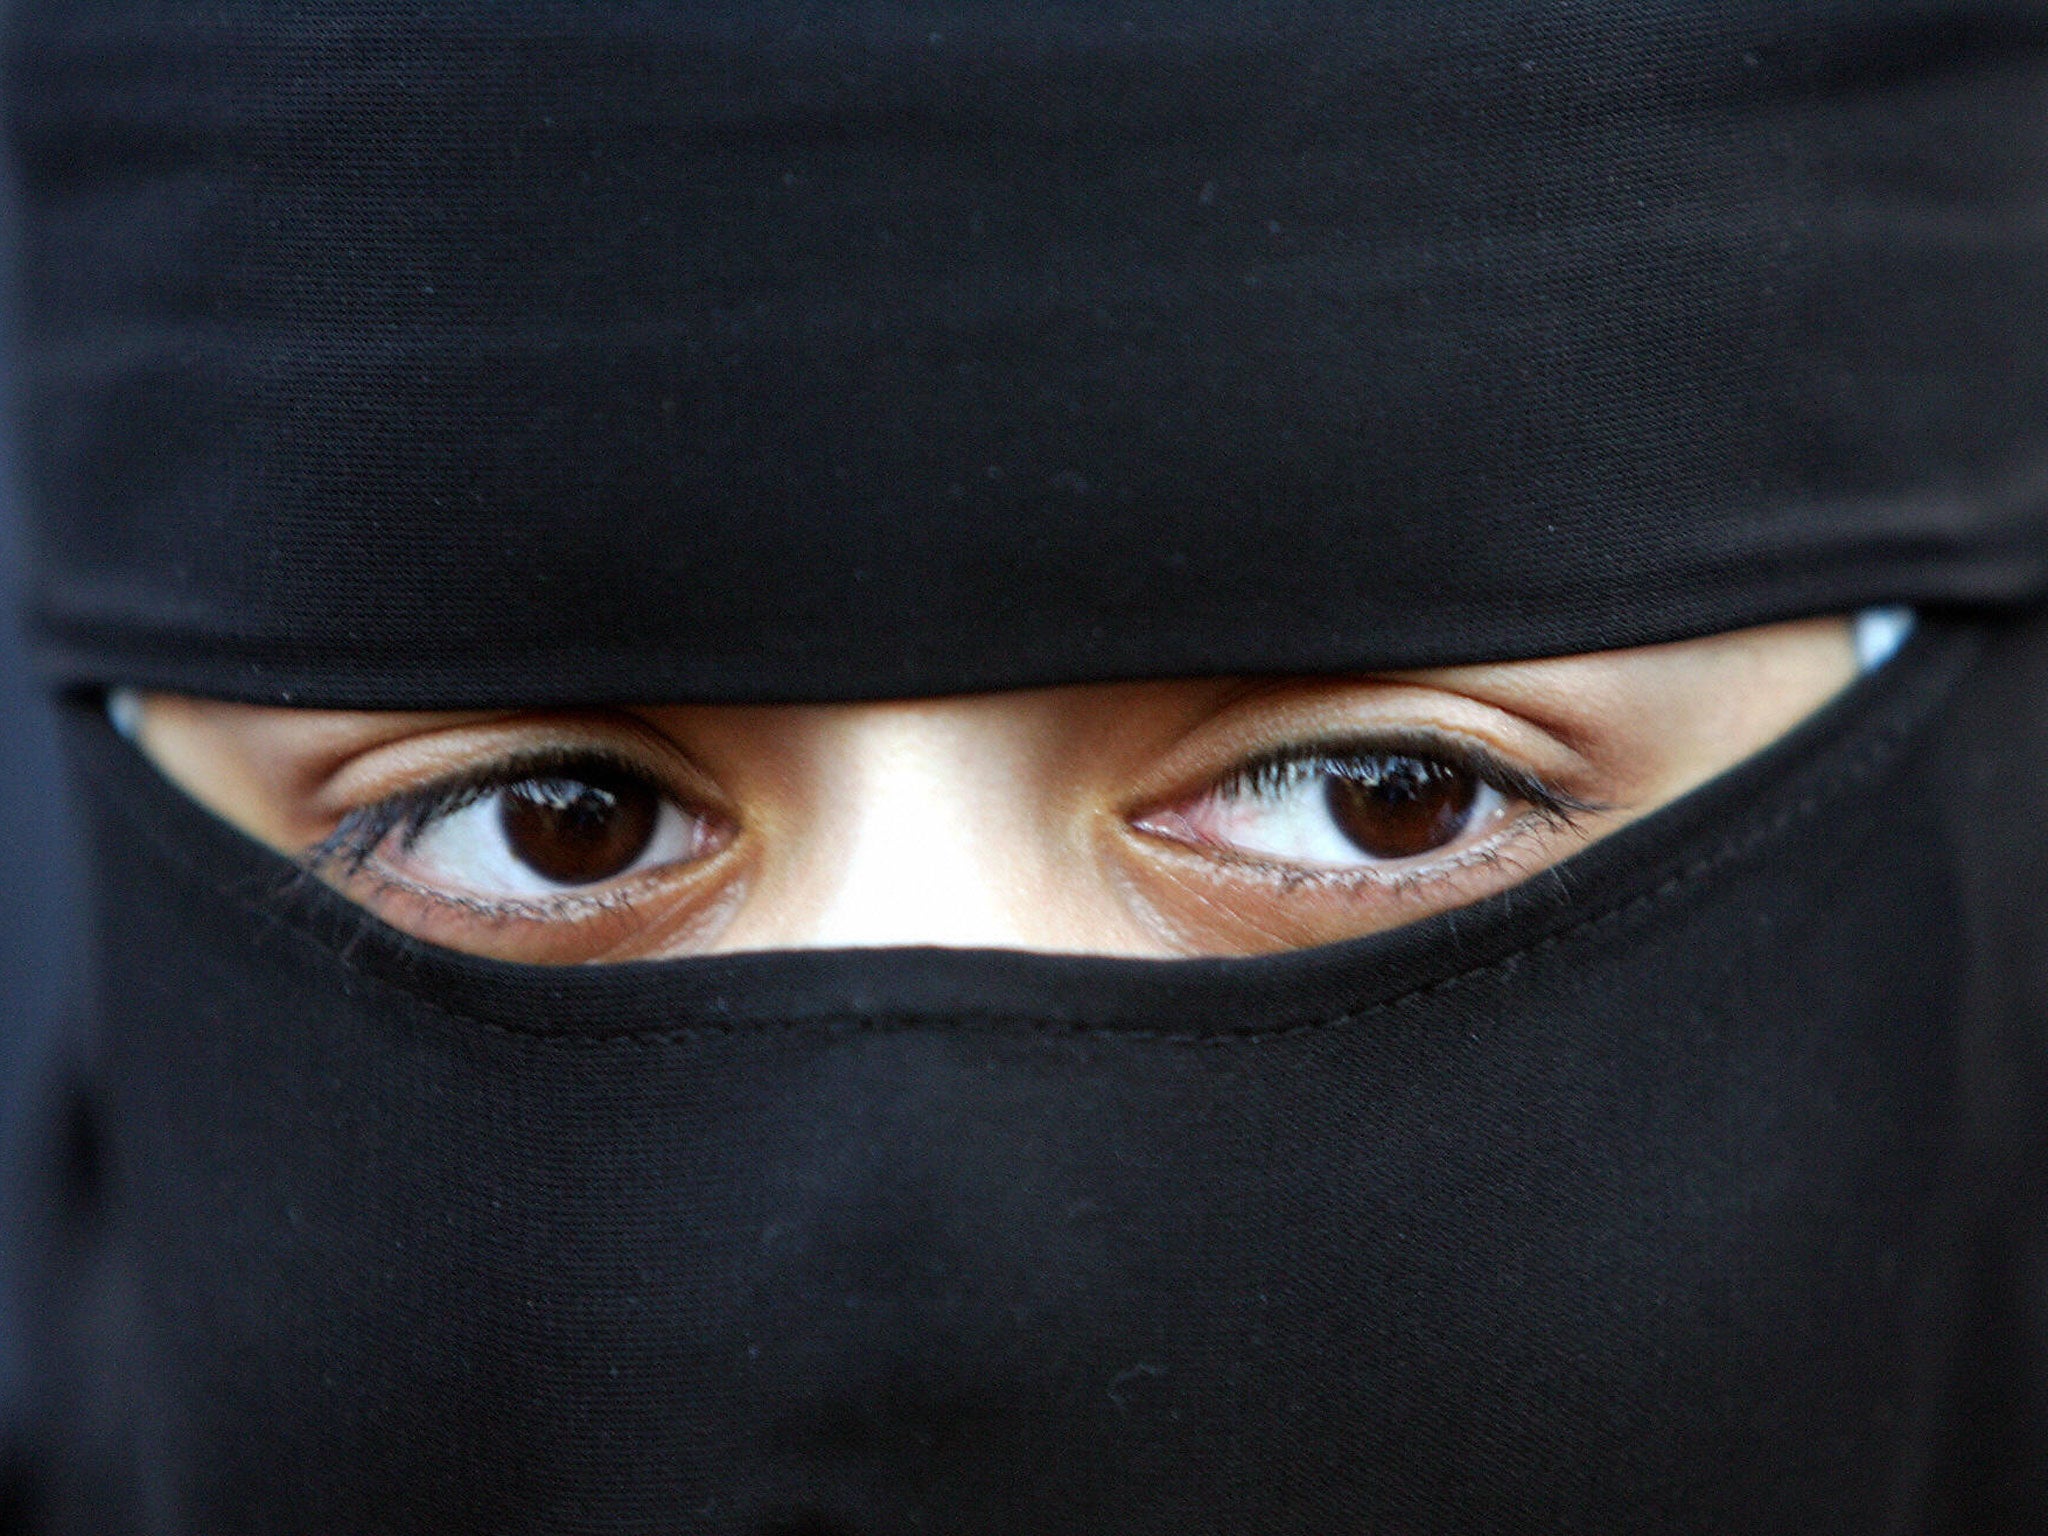 Balaclavas Are Trendy, but for Some Muslim Women It's More